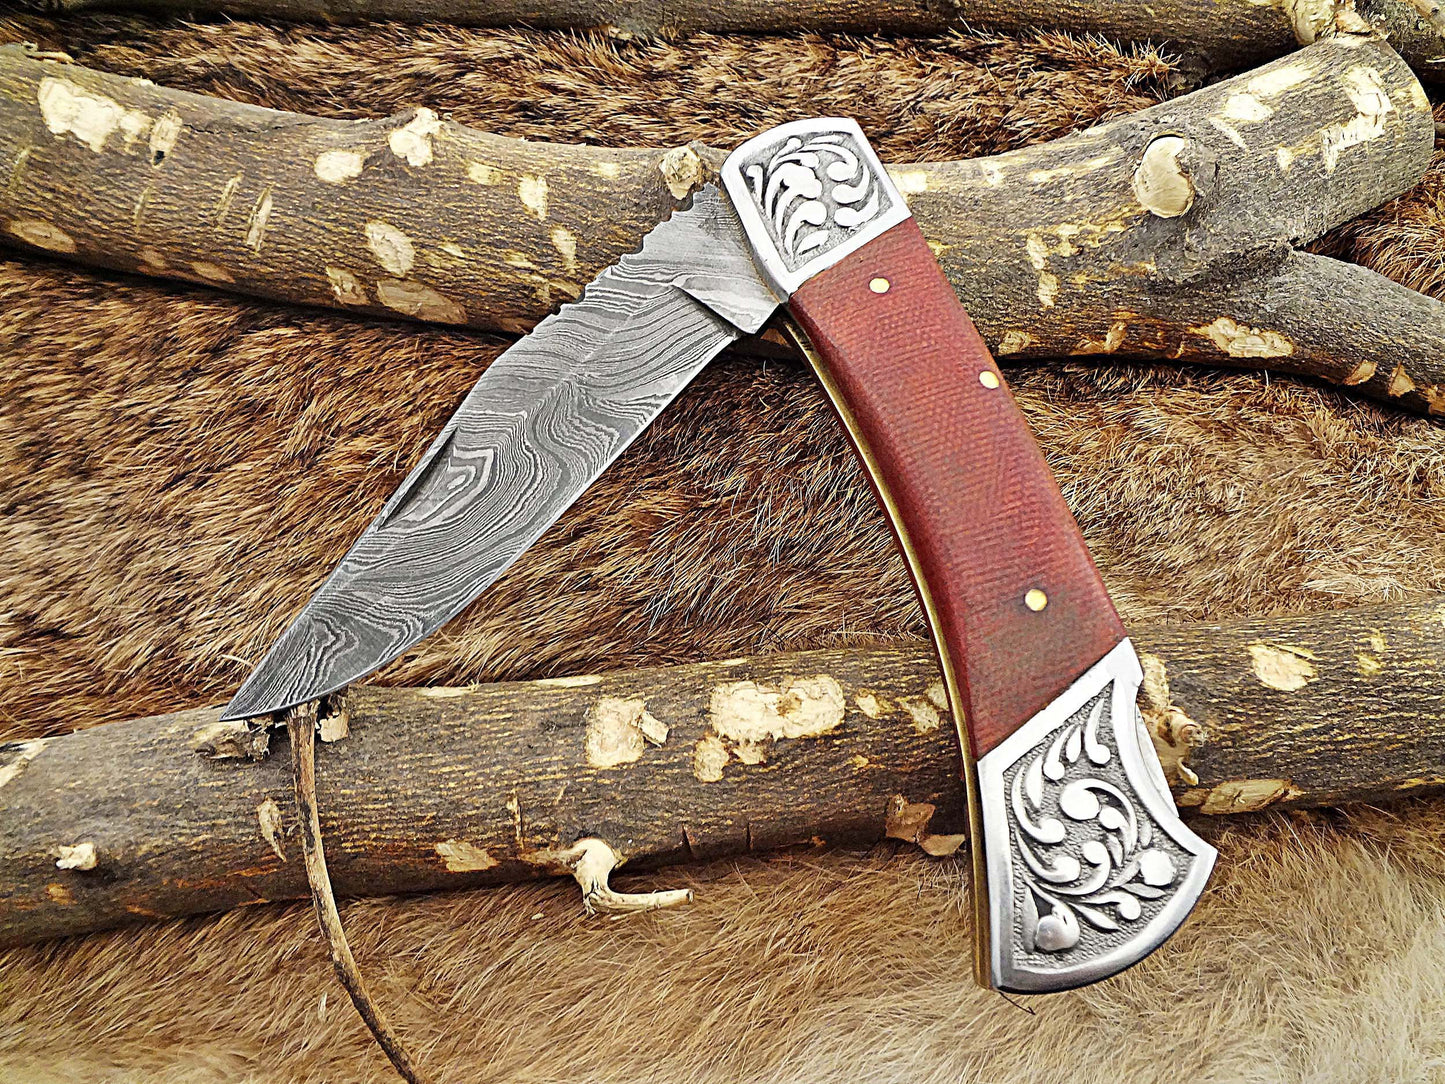 Micarta wood Scale with Engraved steel bolster Damascus steel 9" long Folding Knife custom made 4" Hand Forged blade cow hide leather sheath